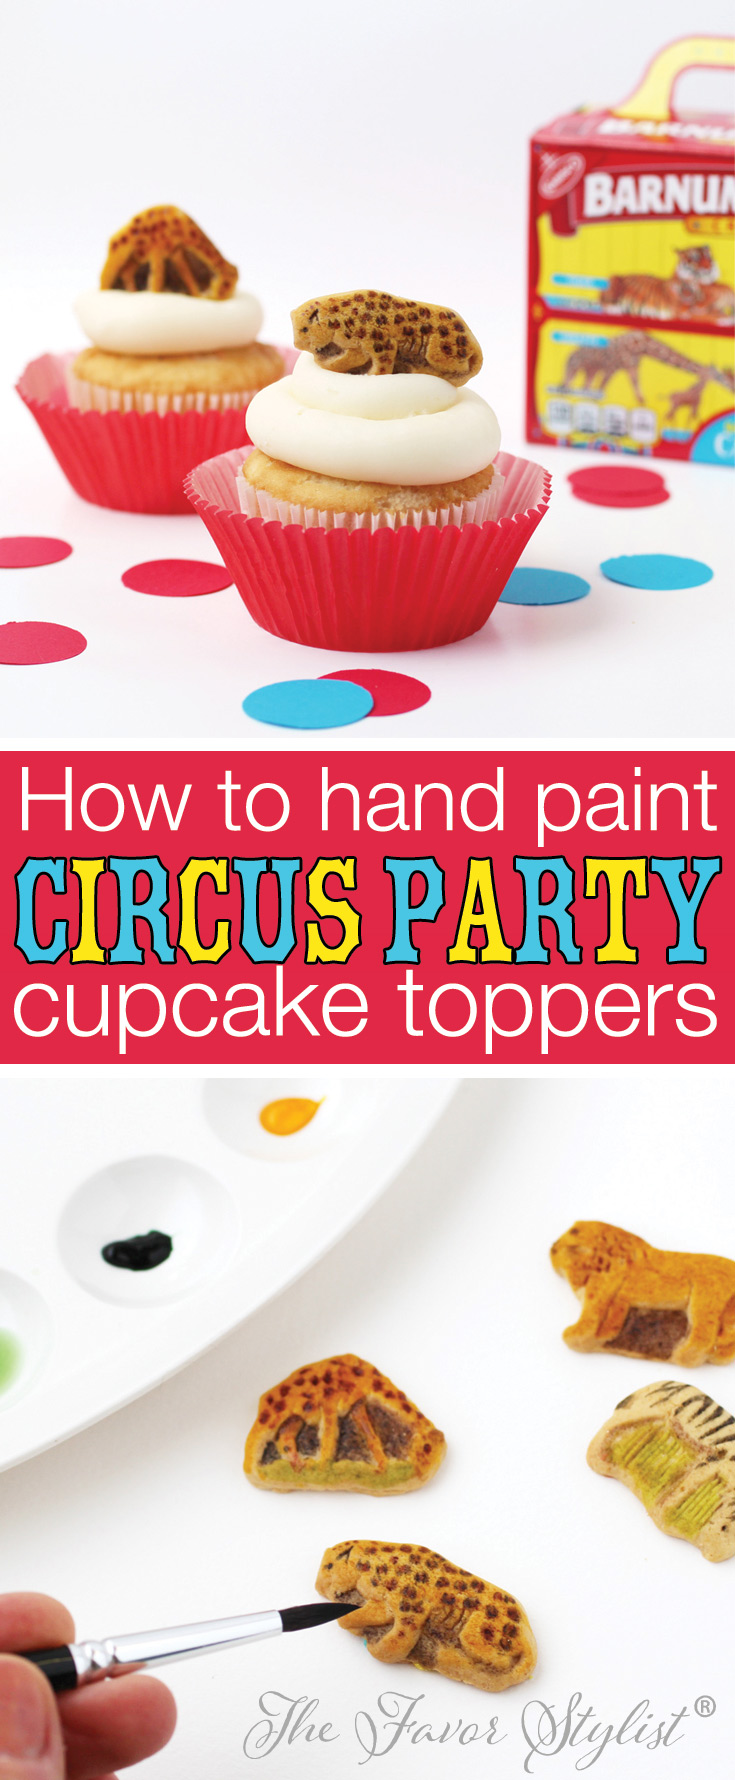 How to hand paint circus party cupcake toppers